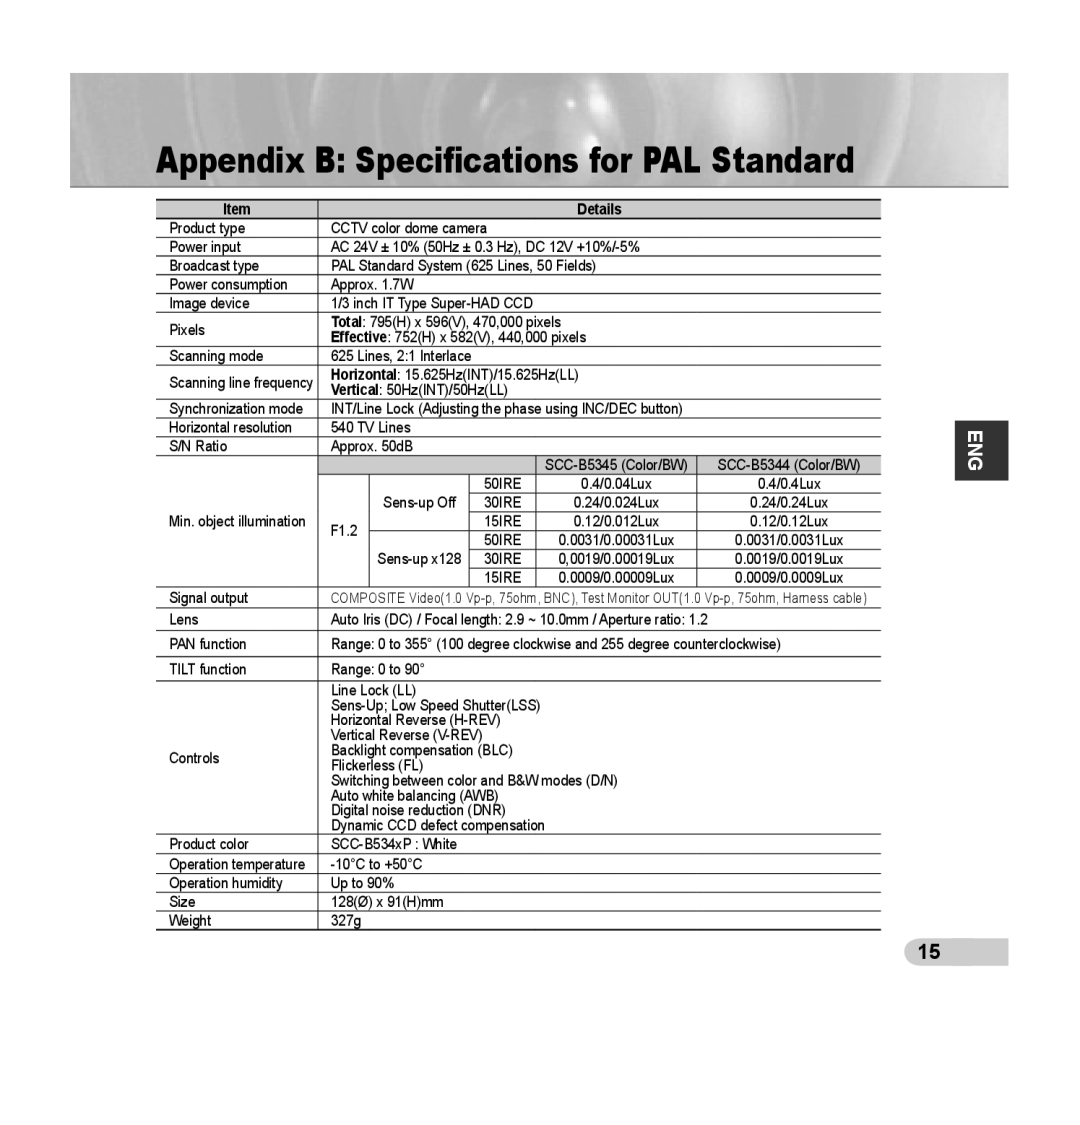 Samsung SCC-B5345, SCC-B5344 operating instructions Appendix B Specifications for PAL Standard, Details 